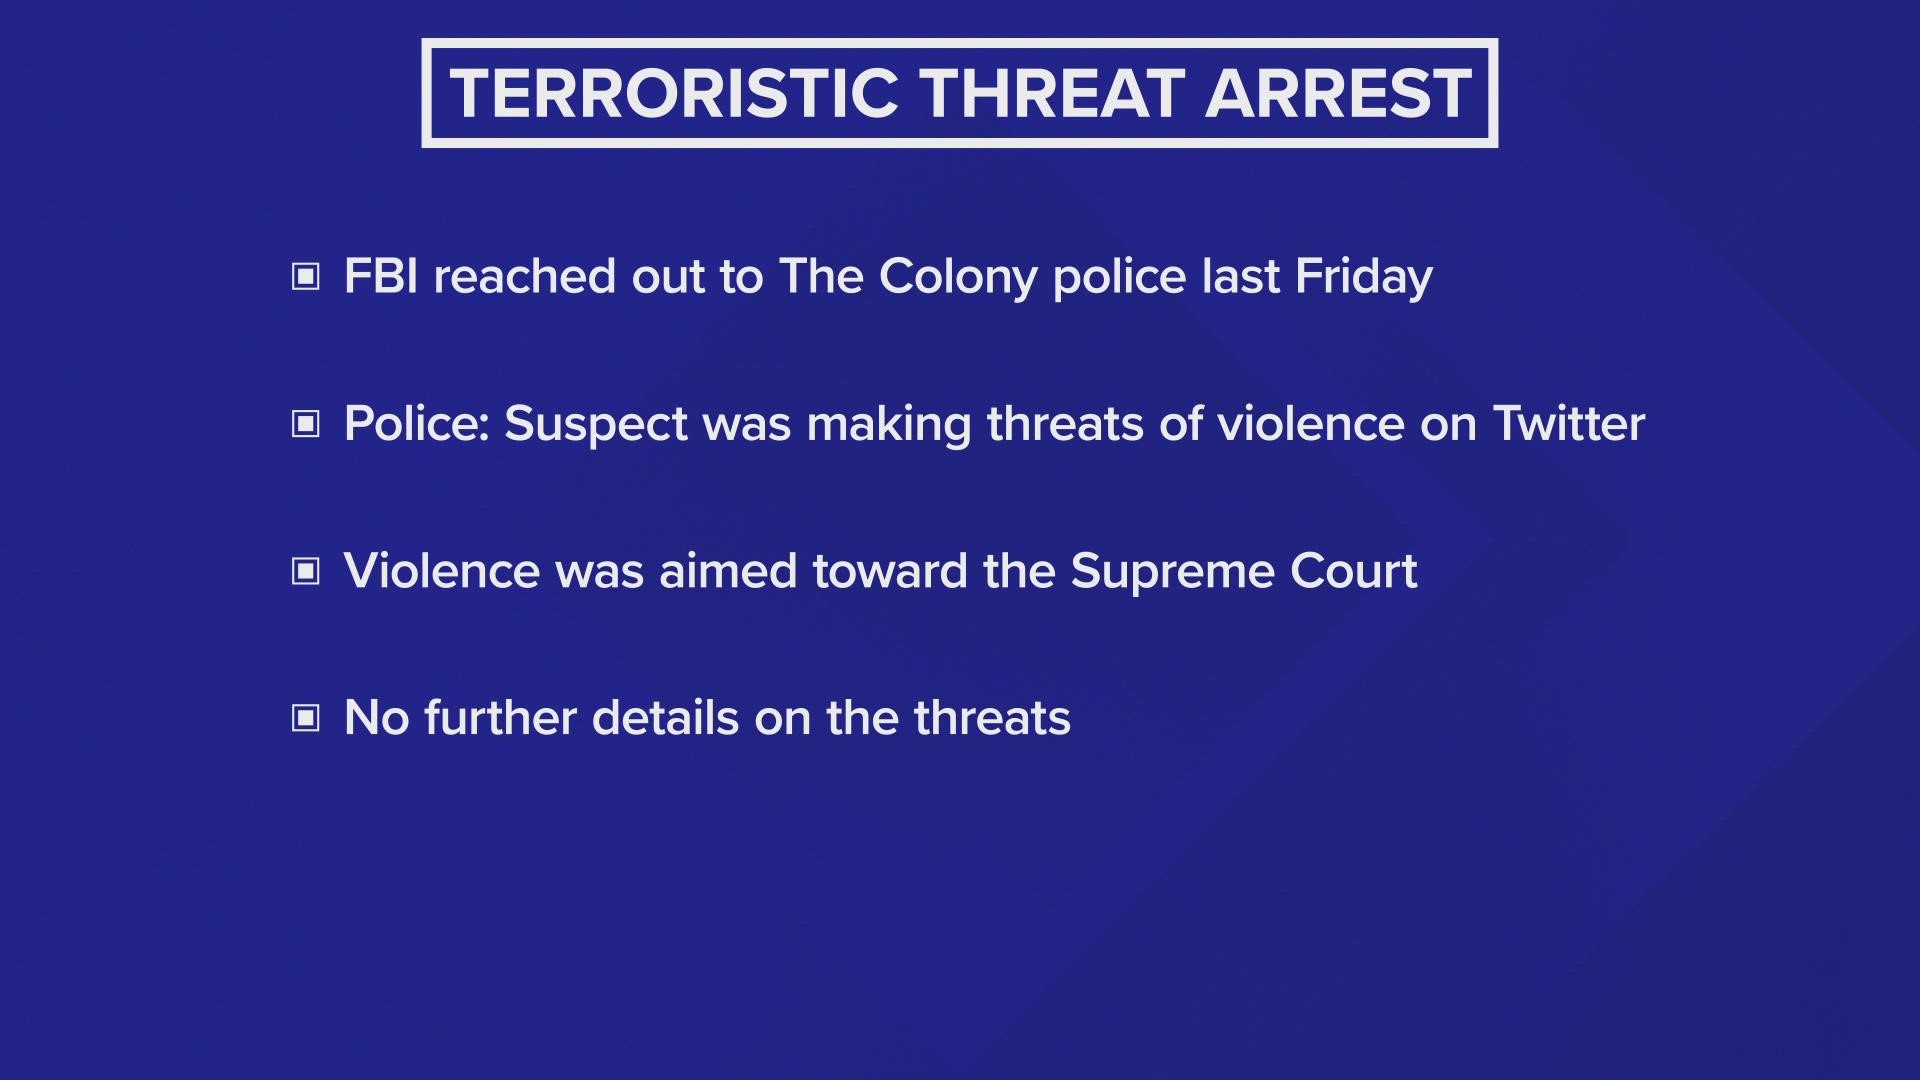 Police arrested a resident of The Colony, Texas, on Thursday after he reportedly made threats online toward the U.S. Supreme Court.